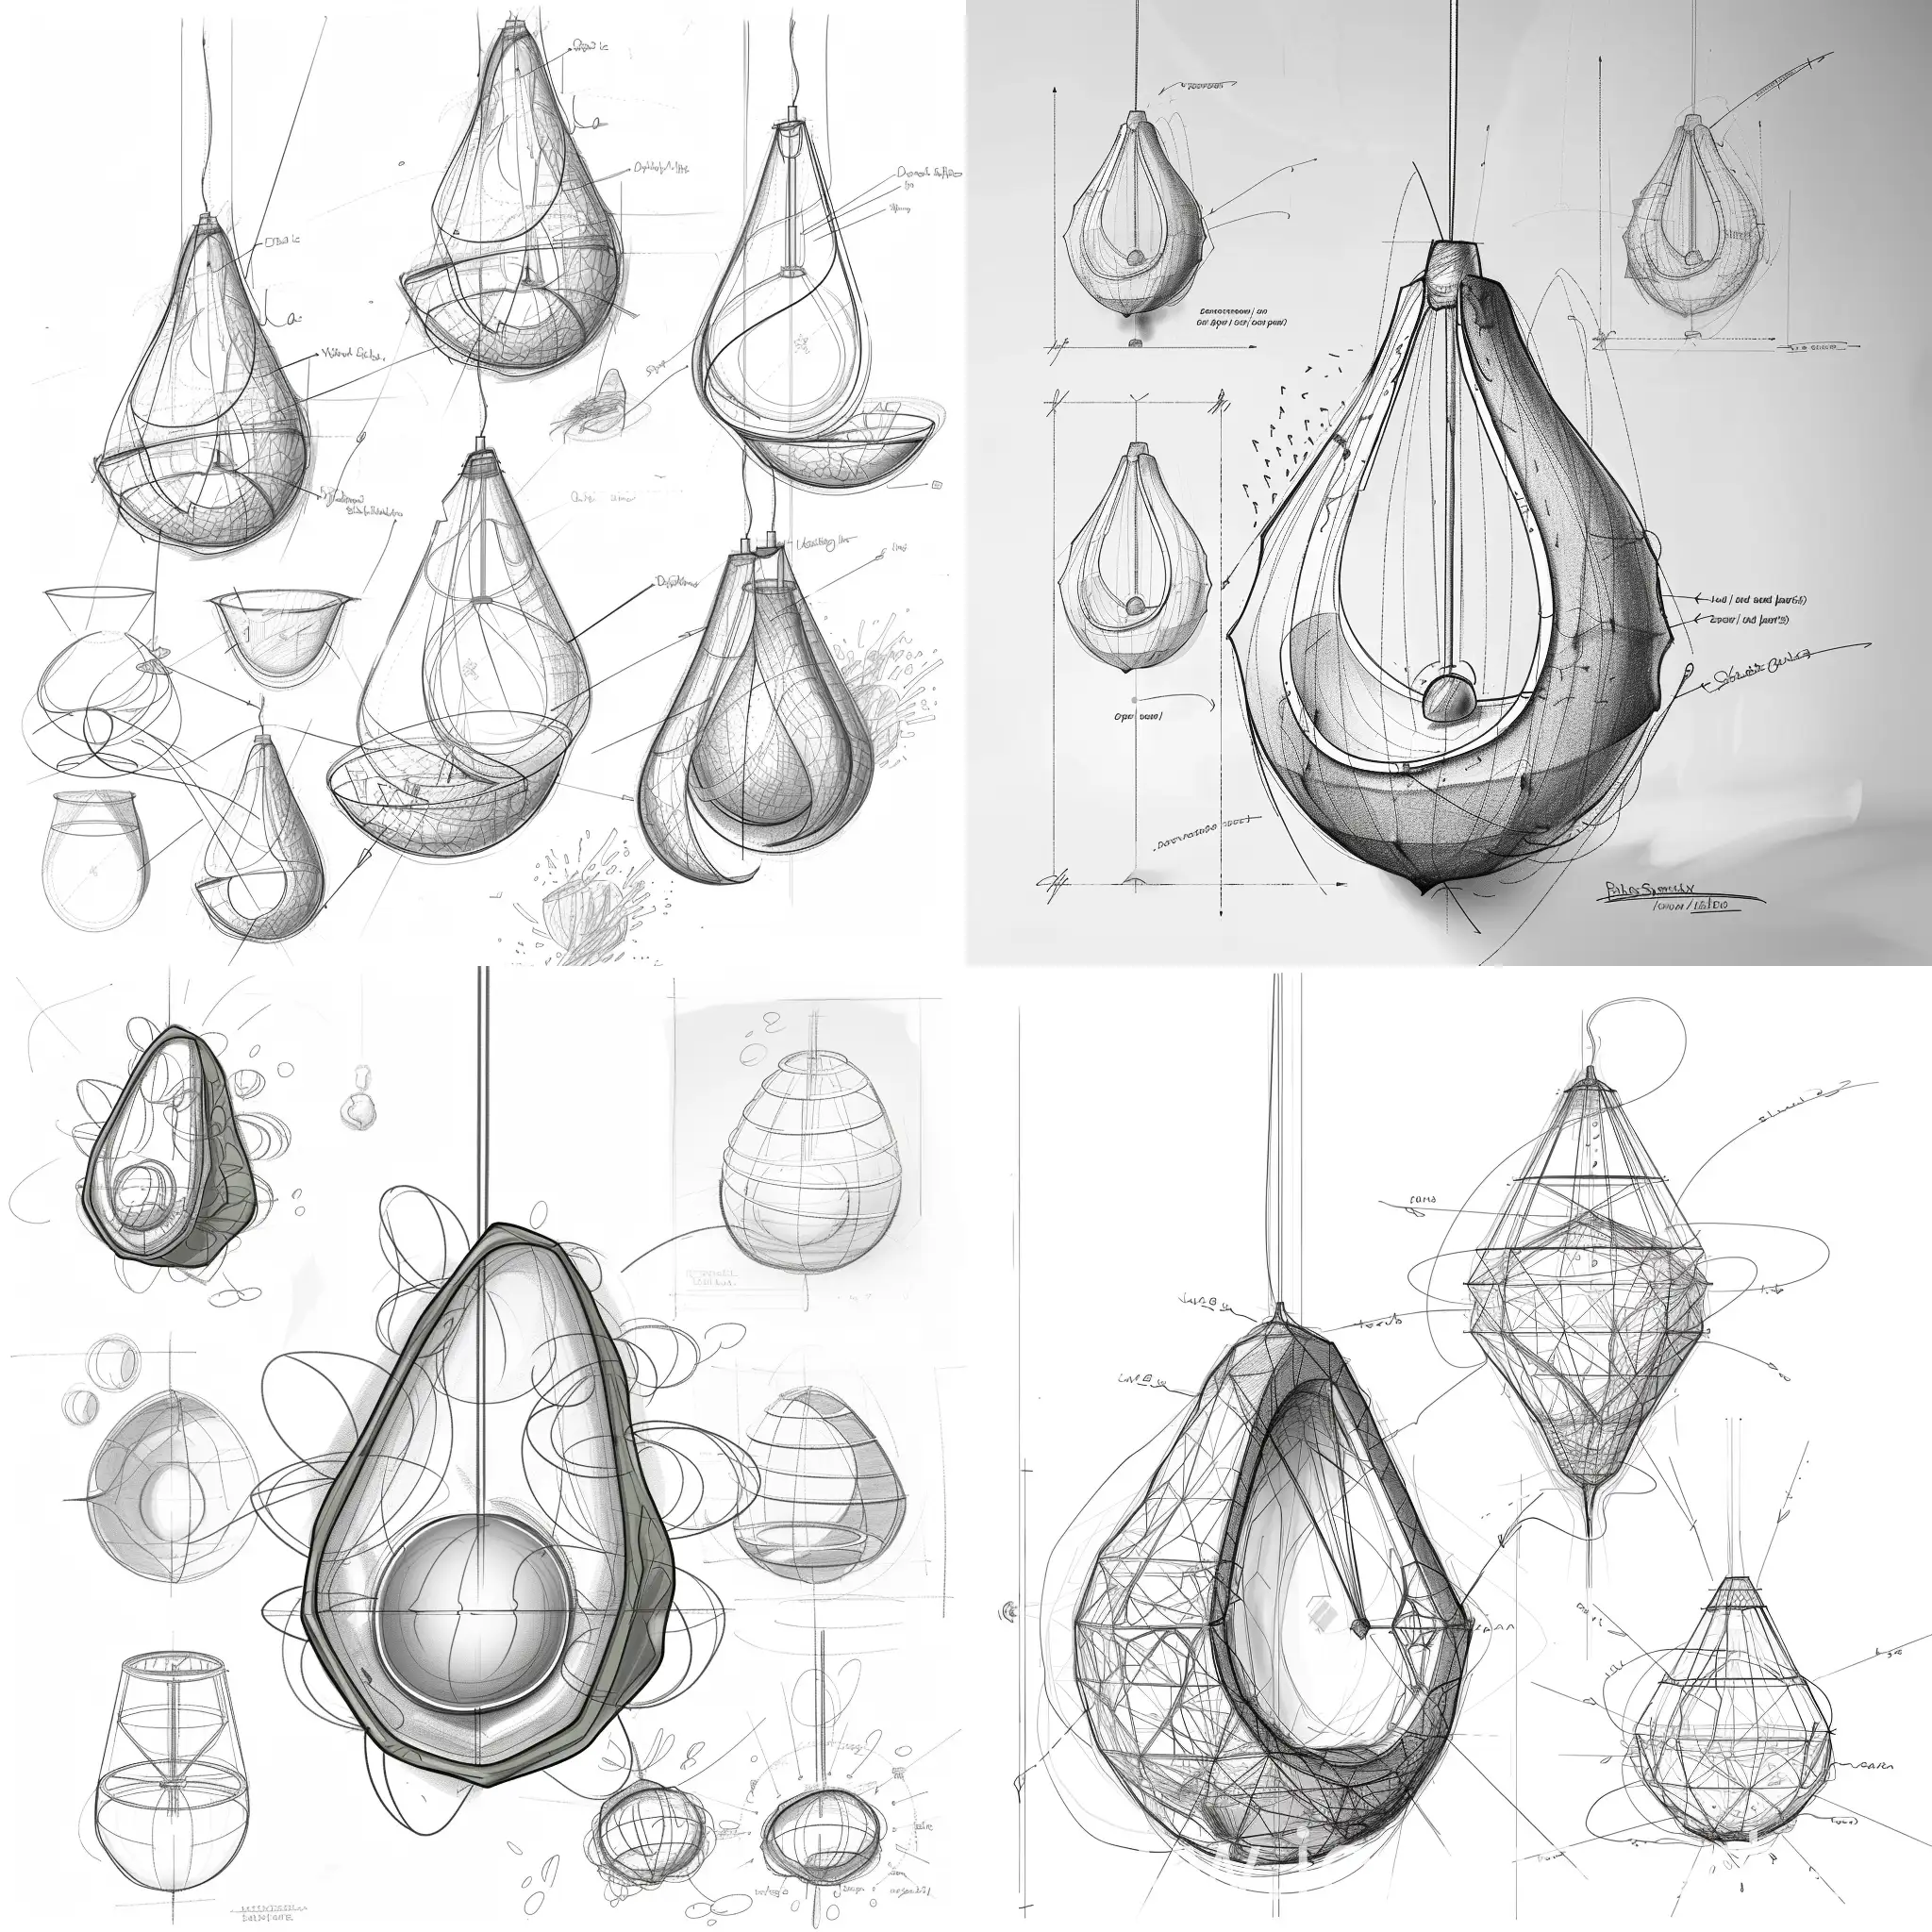 Hand-drawn product design, lighting design, extract avocado shape, craft lines, simplicity, line extraction, Tumbler lighting design sketch
Bionic its texture bionic modeling deductive change process, modeling source, modeling change, refinement, summary process, how to draw lamps, chandeliers, drawing reference, product design sketch, white background, front view, side view, rear view, wire frame, sketch from different angles, pencil line manuscript, each program should present form source and intent, and form change deliberation process; And how to reconstruct and evolve primitive body forms. Main view, detail, explosion